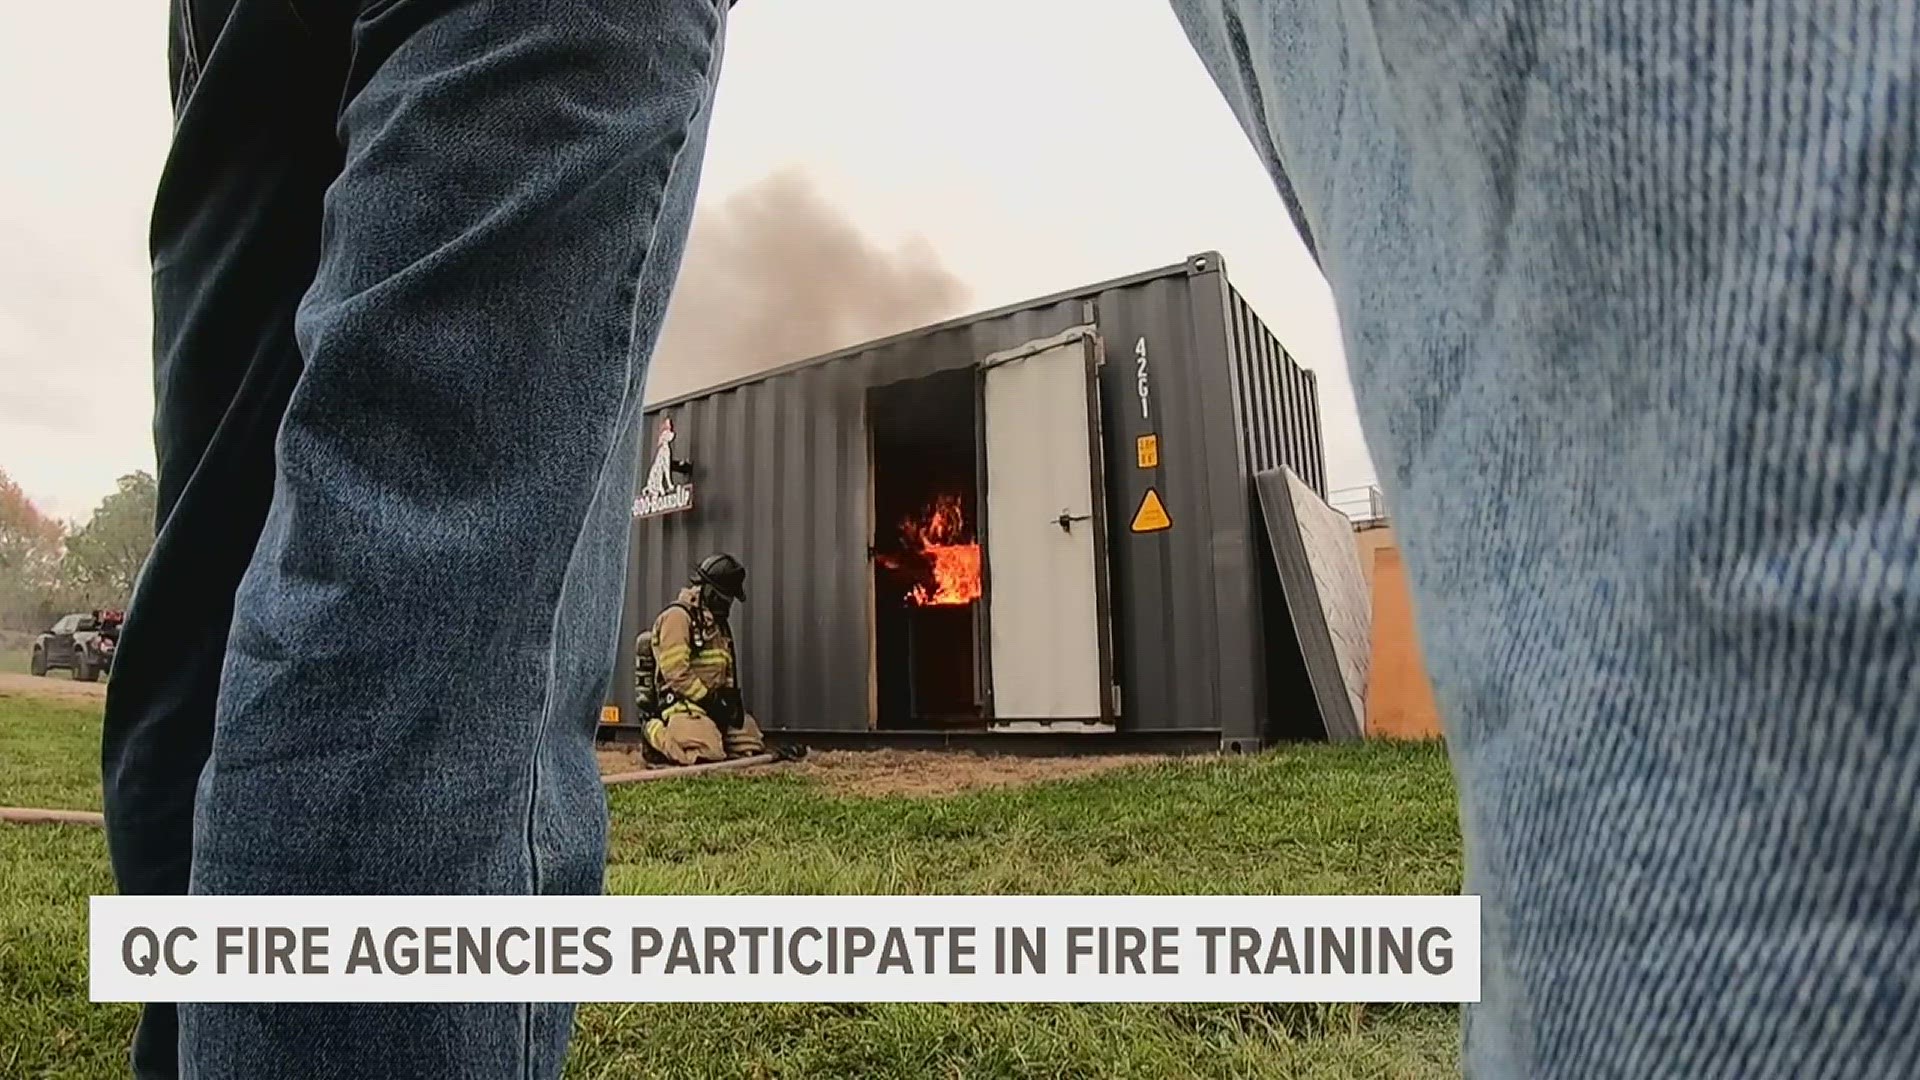 The training aims to help investigators learn new skills and gain new knowledge during a fire investigation.